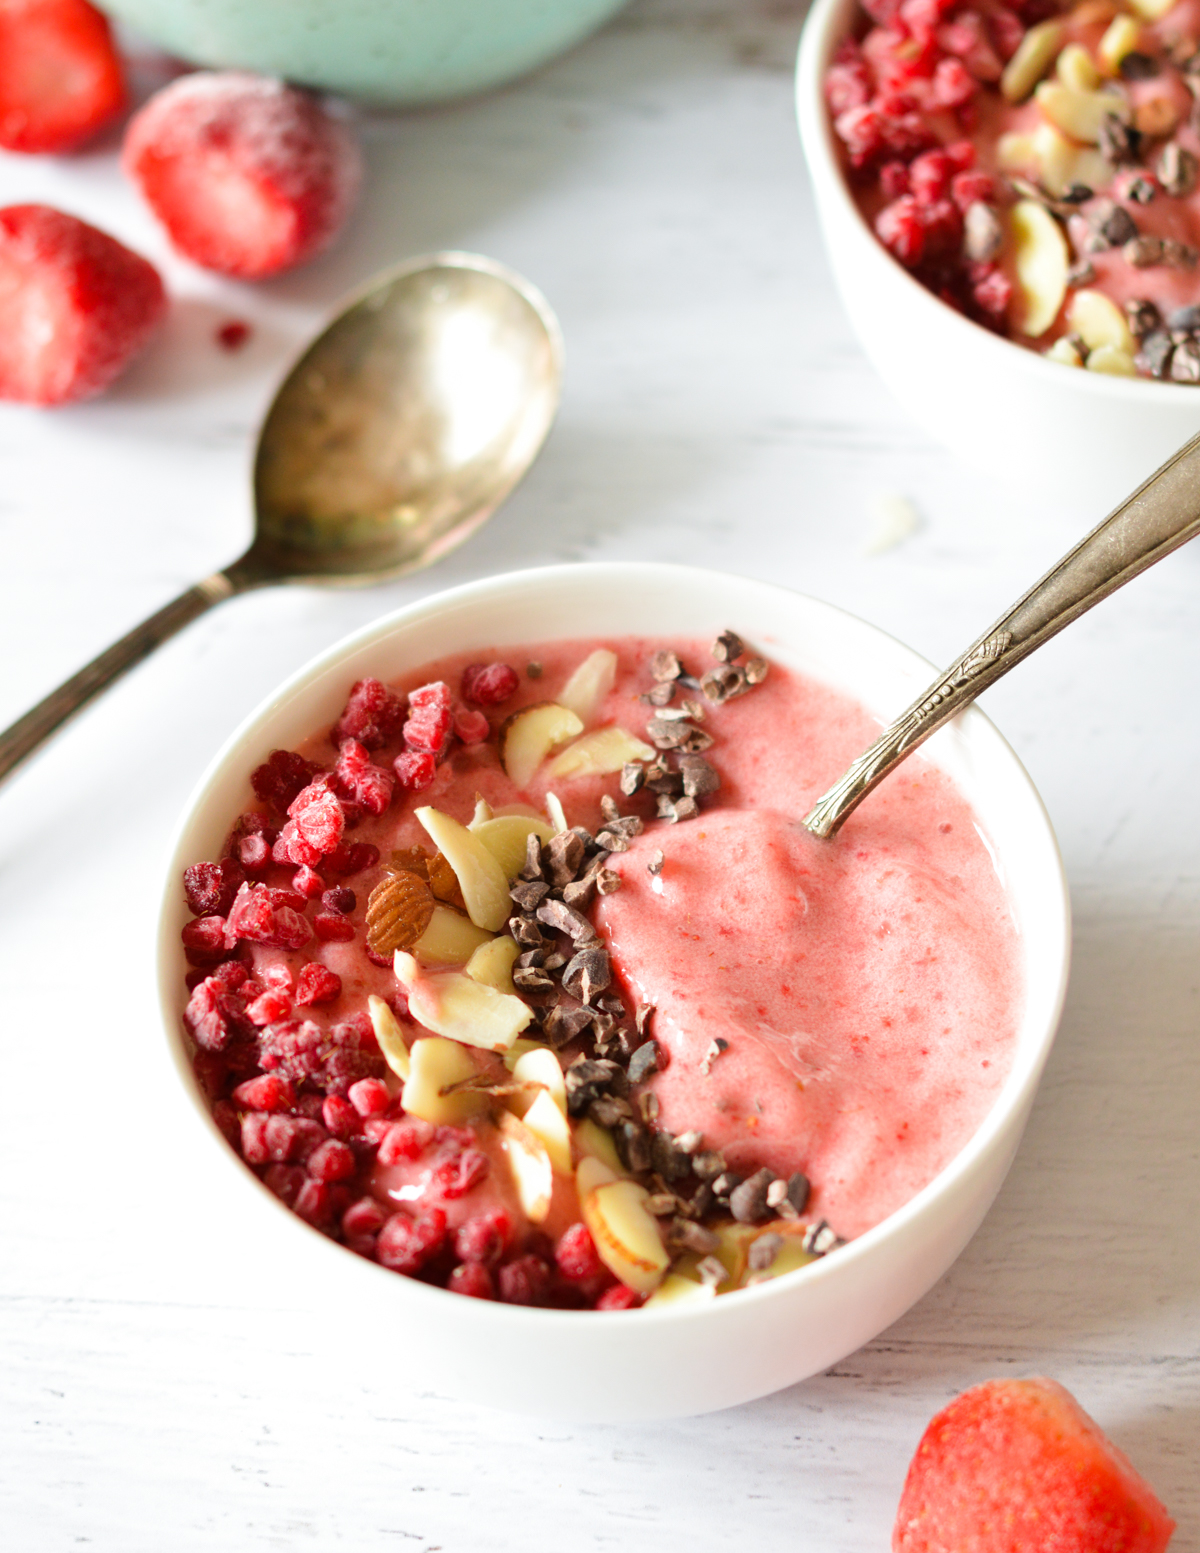 strawberry smoothie bowl with cacao nibs, almonds and raspberries on top.